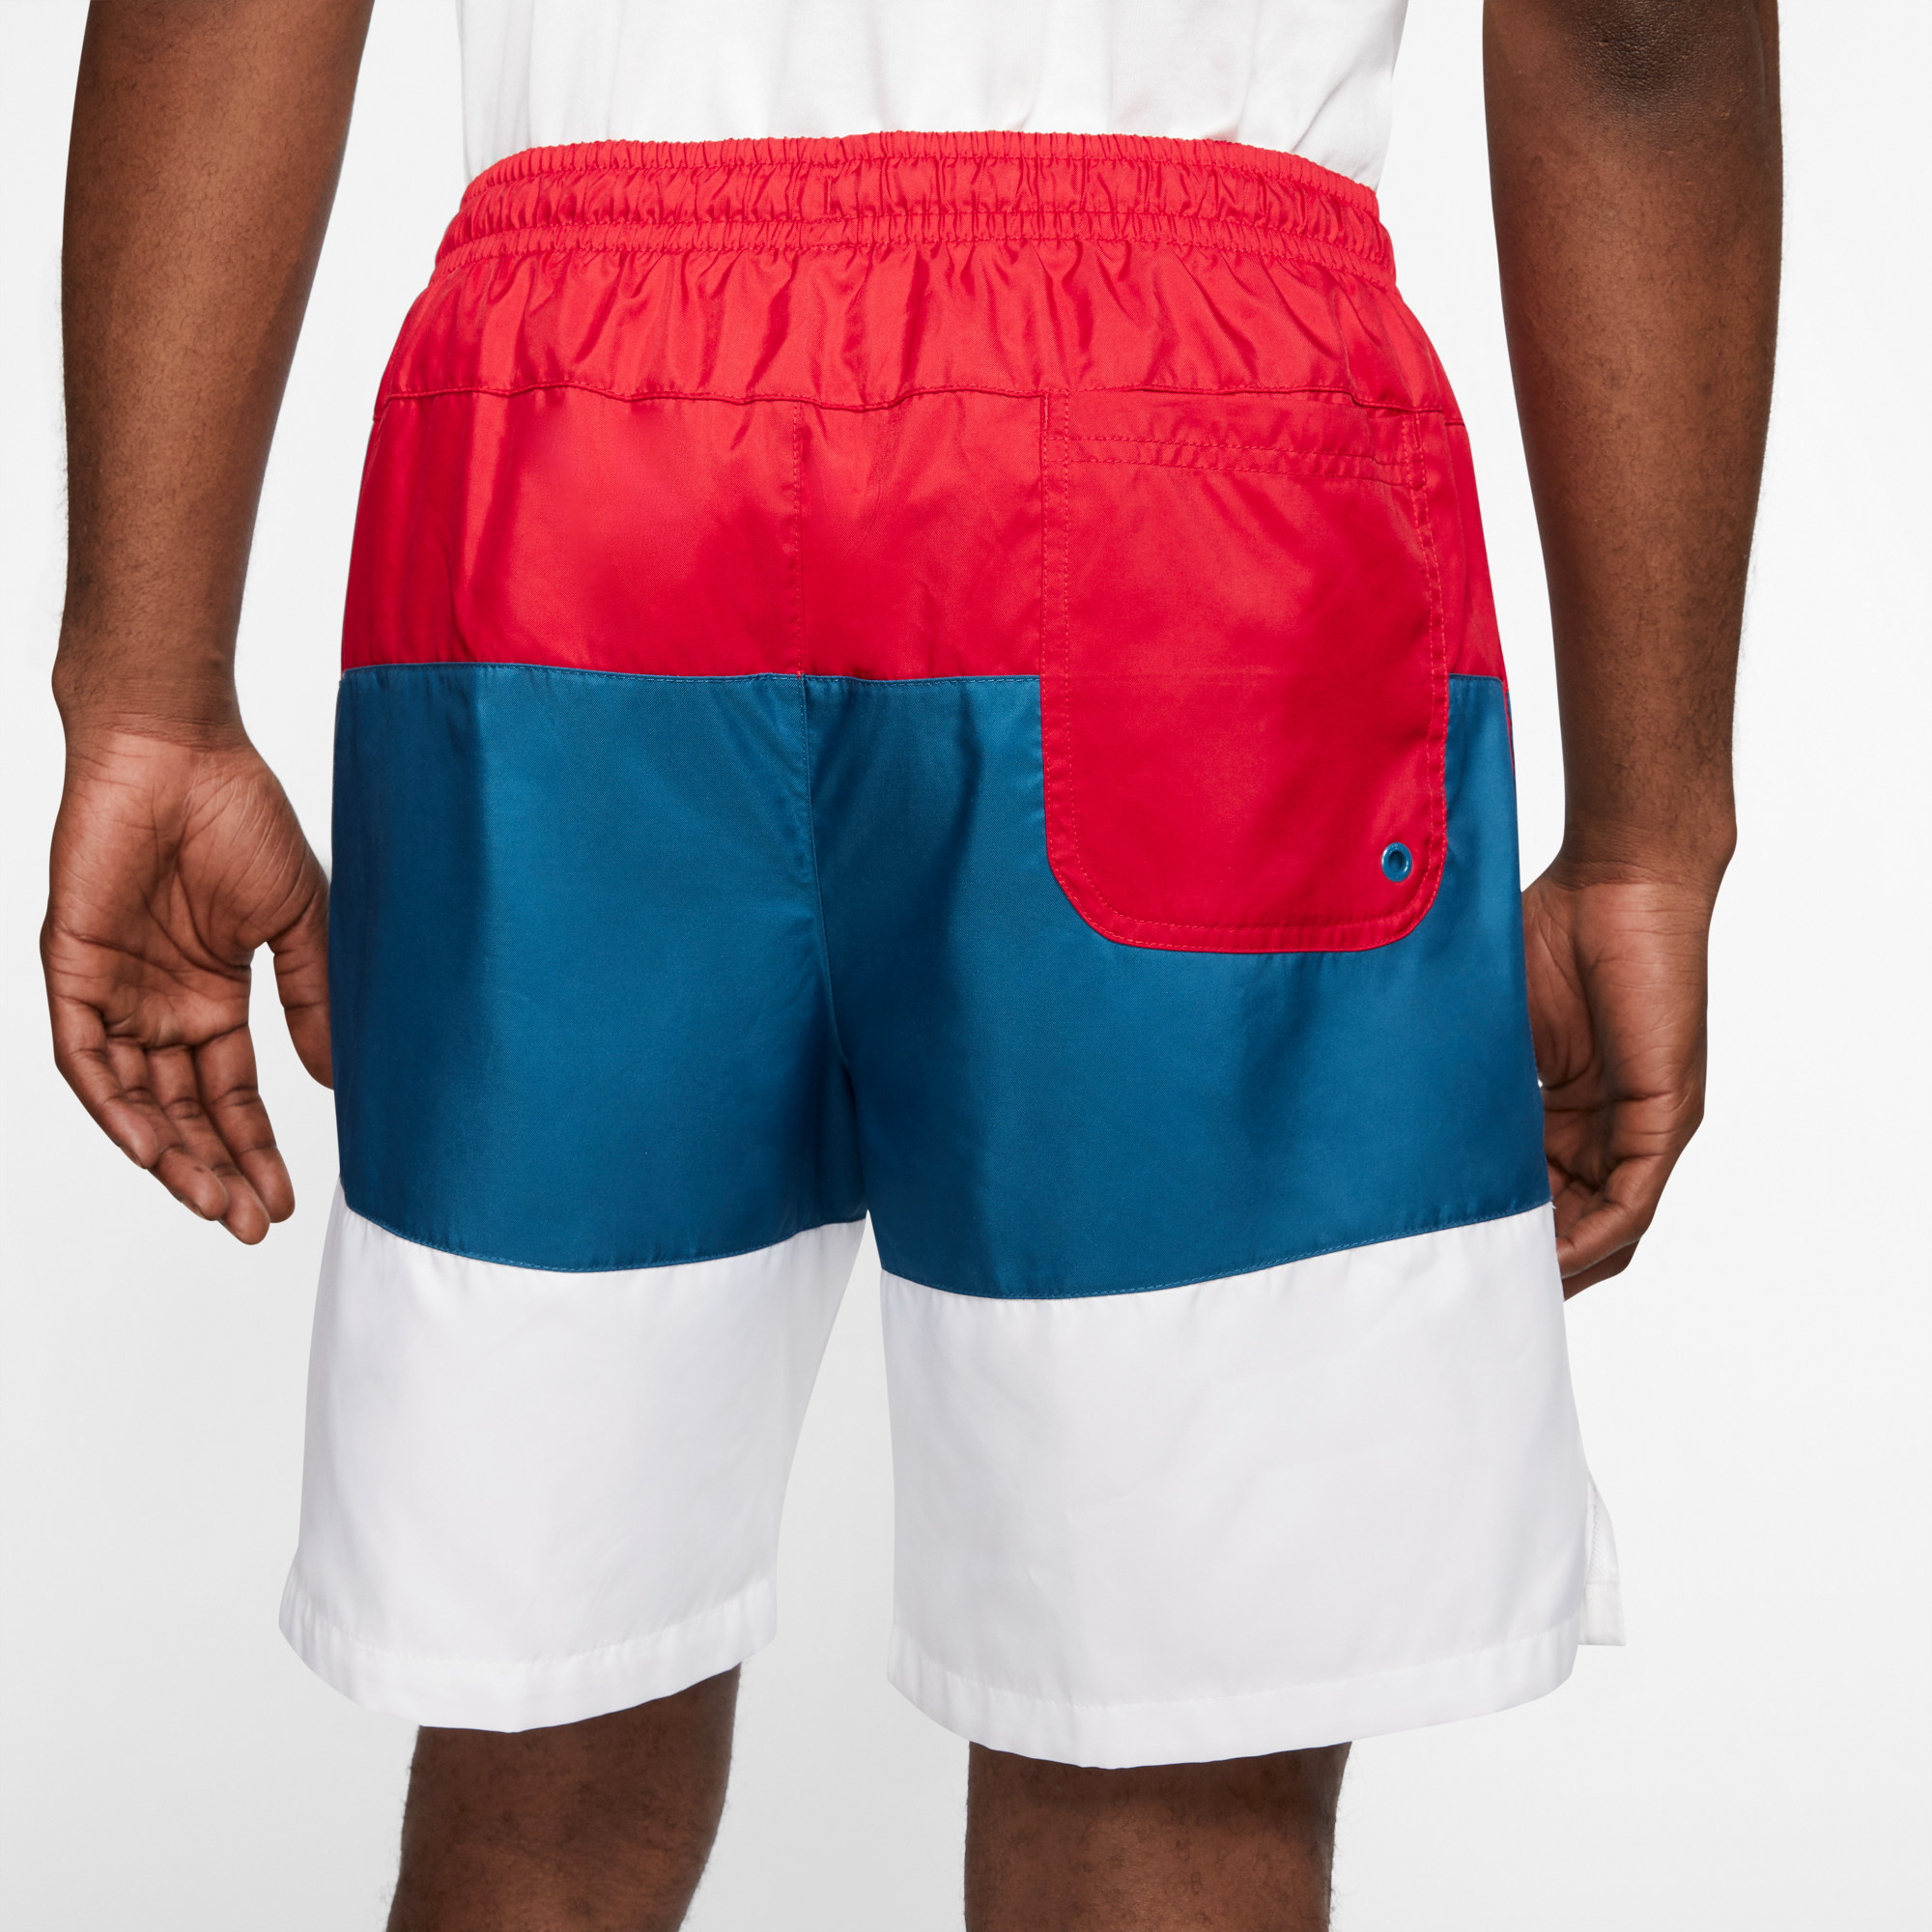 nike shorts red white and blue 